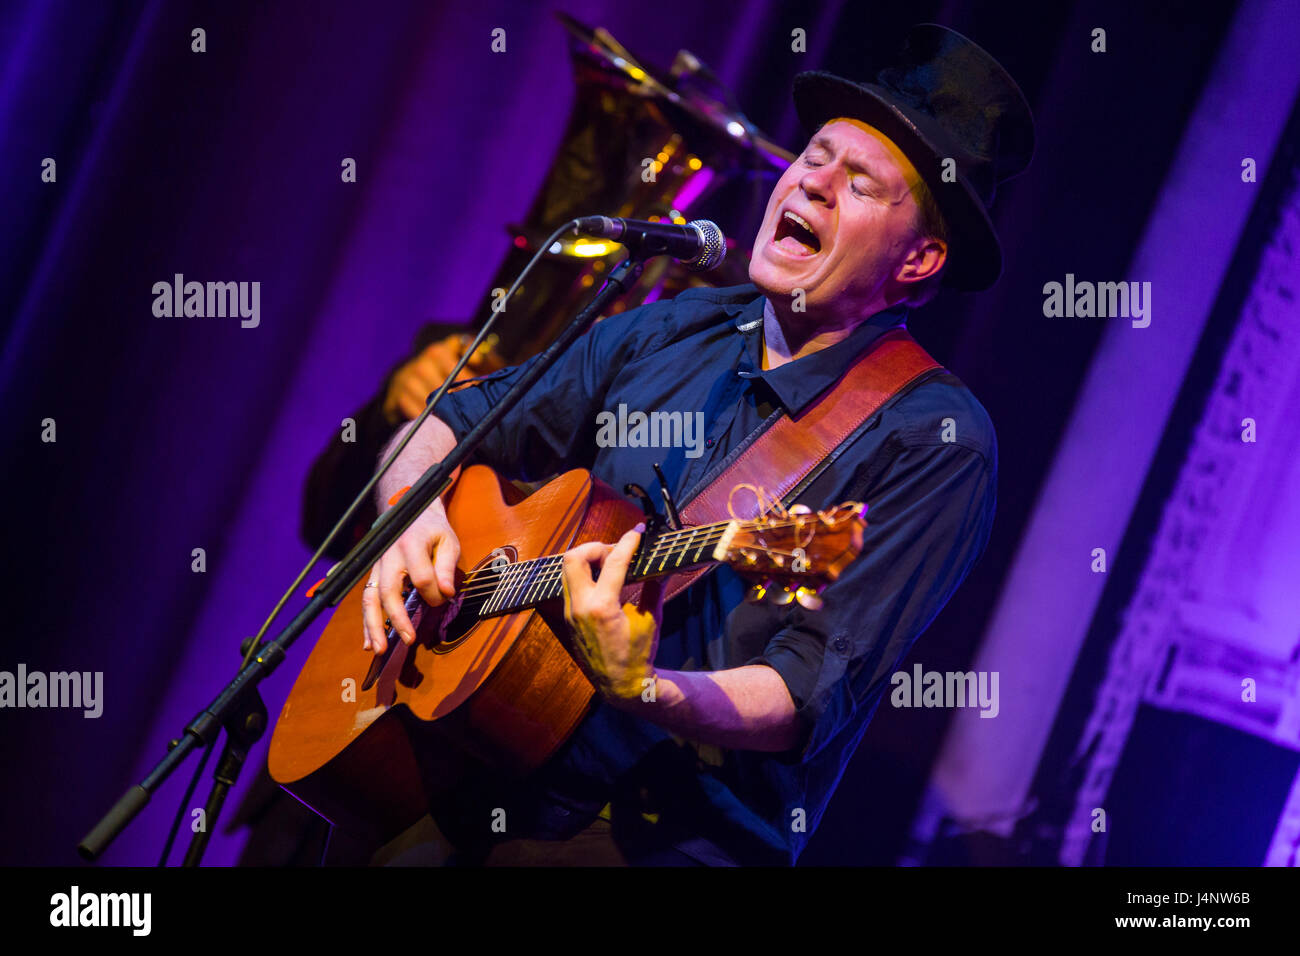 Marburg, Germany. 11.05.2017. Jimmy Kelly and Band, The Streetkid Vol. 2 Tour, concert in Waggonhalle Marburg. Jimmy Kelly - in the last years performing as busker/street performer - is know as member of folk and pop band The Kelly Family --- Fotocredit: Christian Lademann Stock Photo